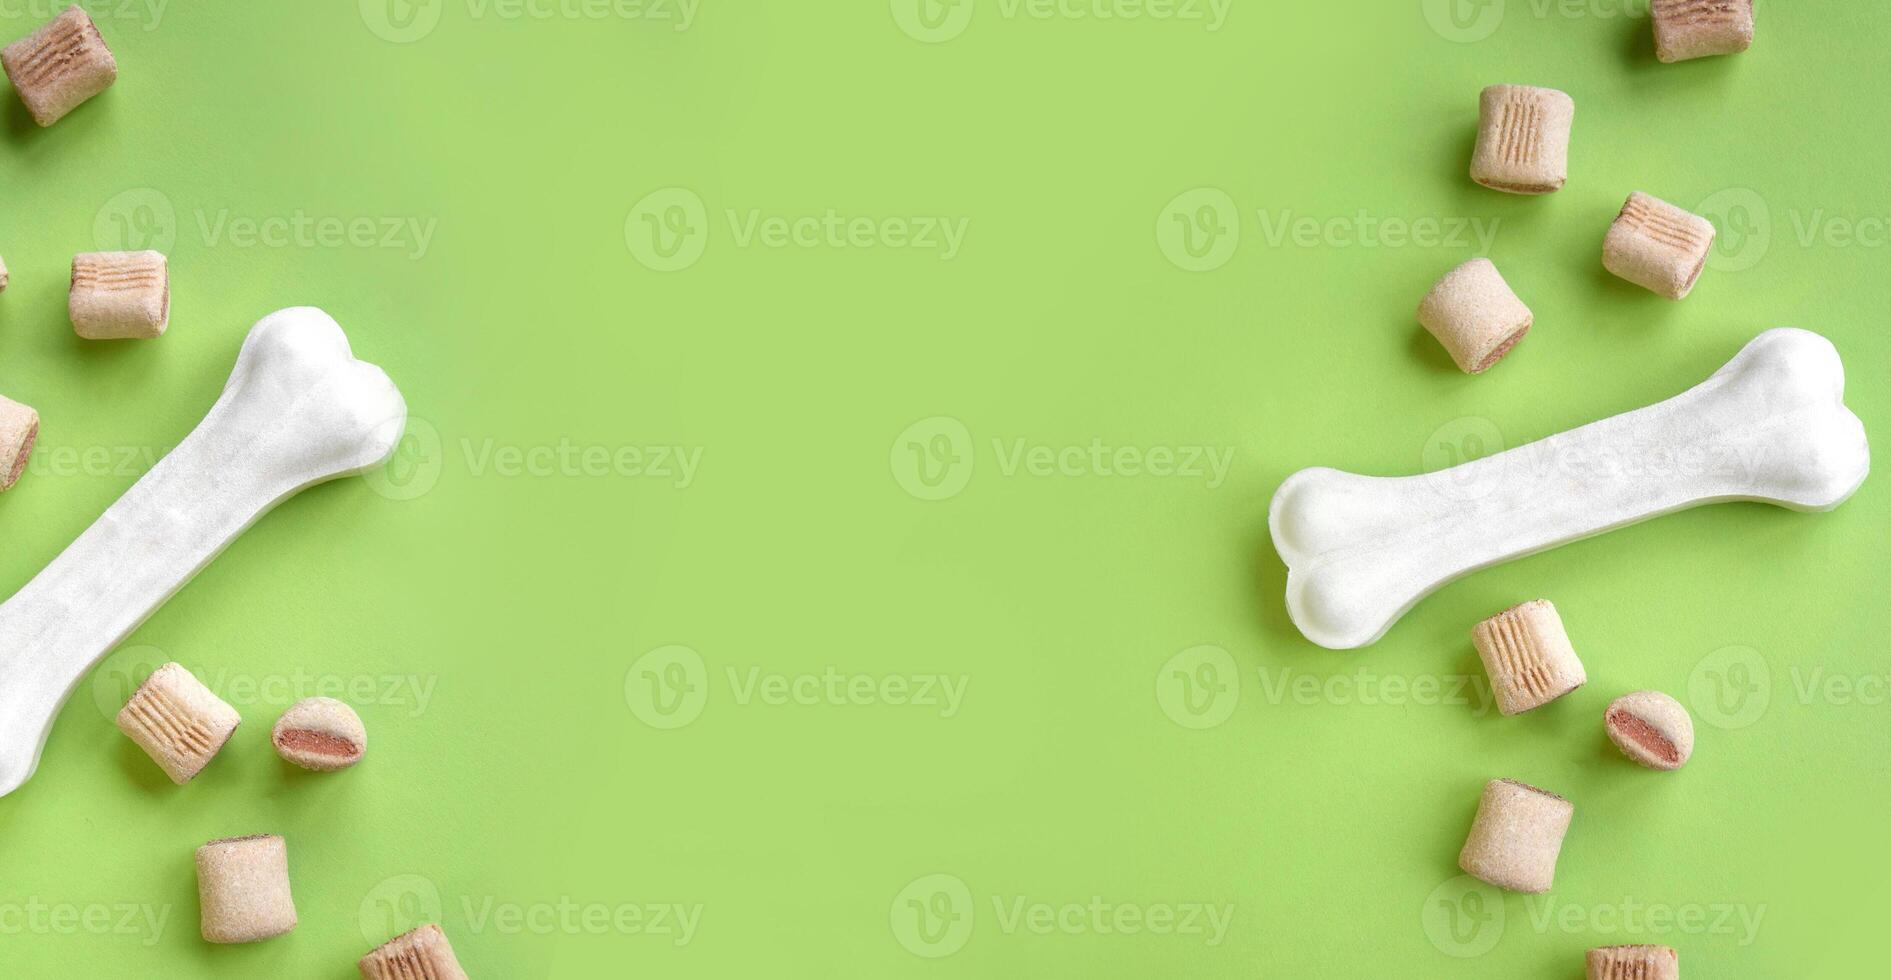 Treats for dogs on a light green background. photo